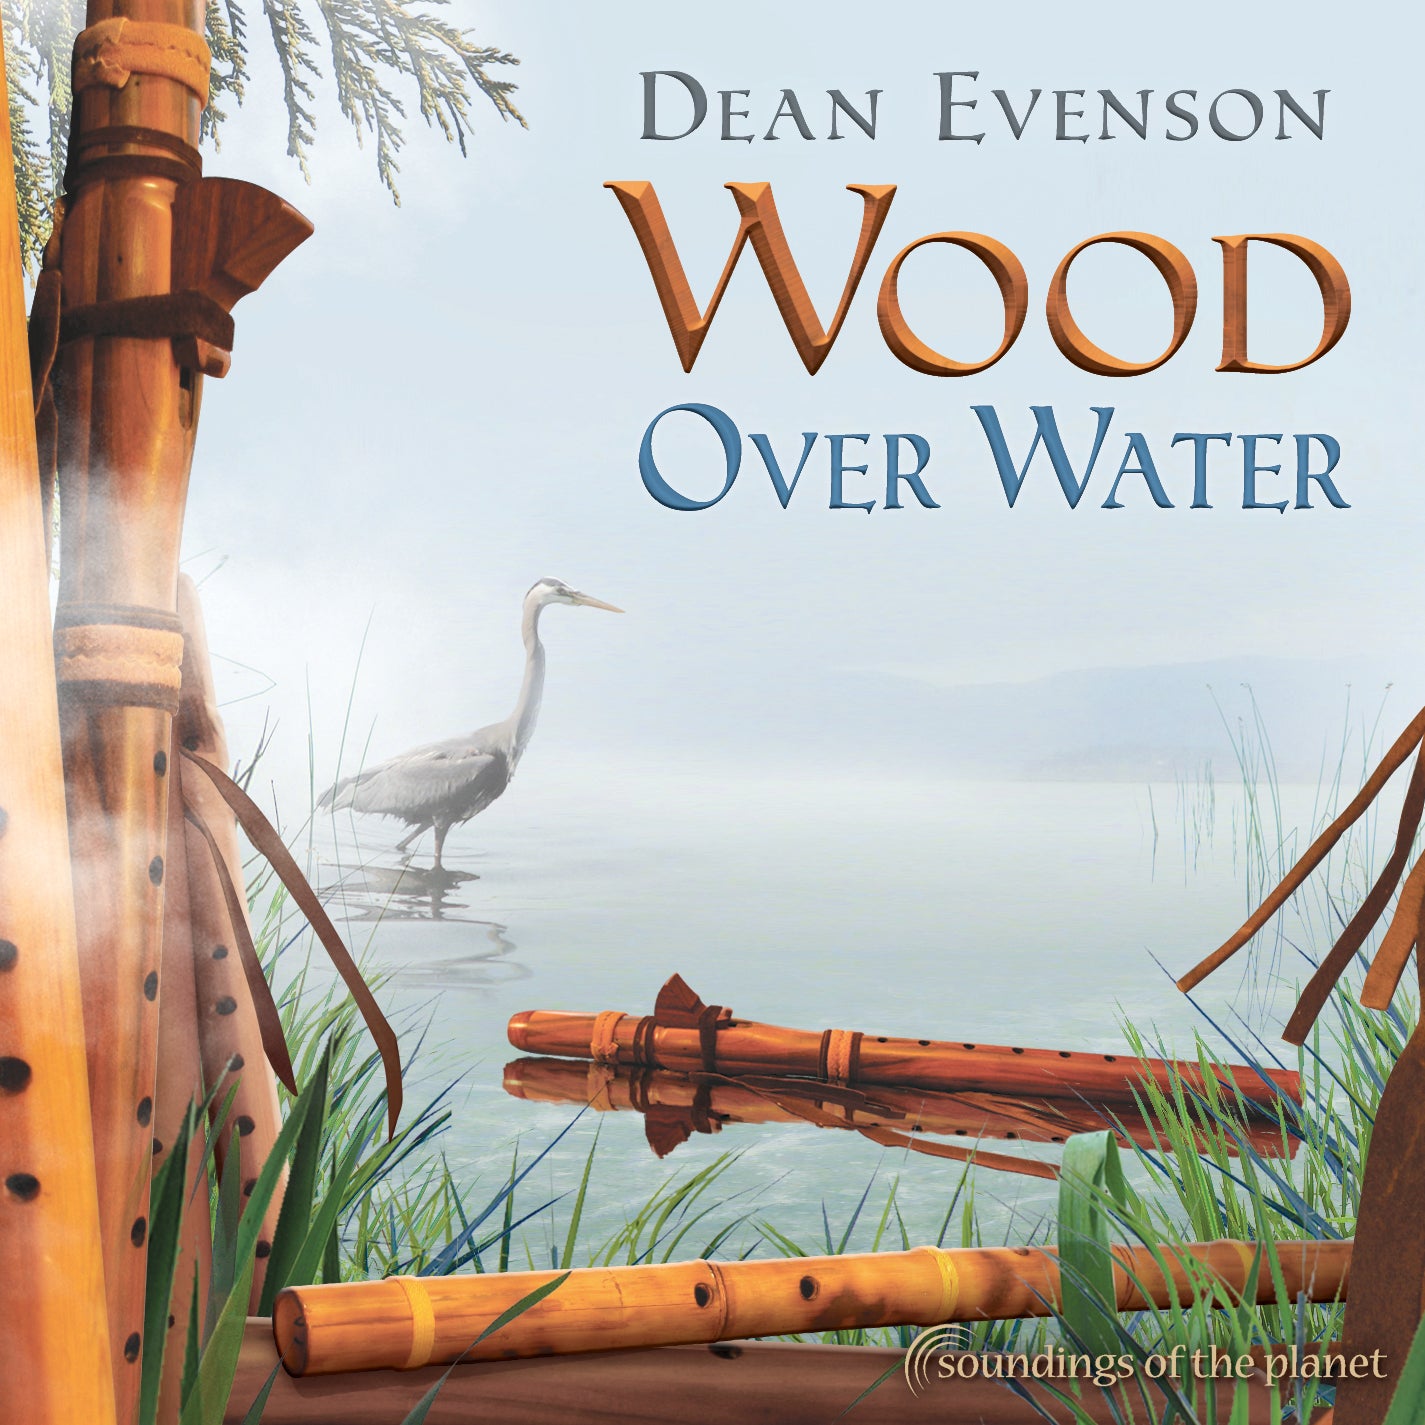 wood over water Dean Evenson